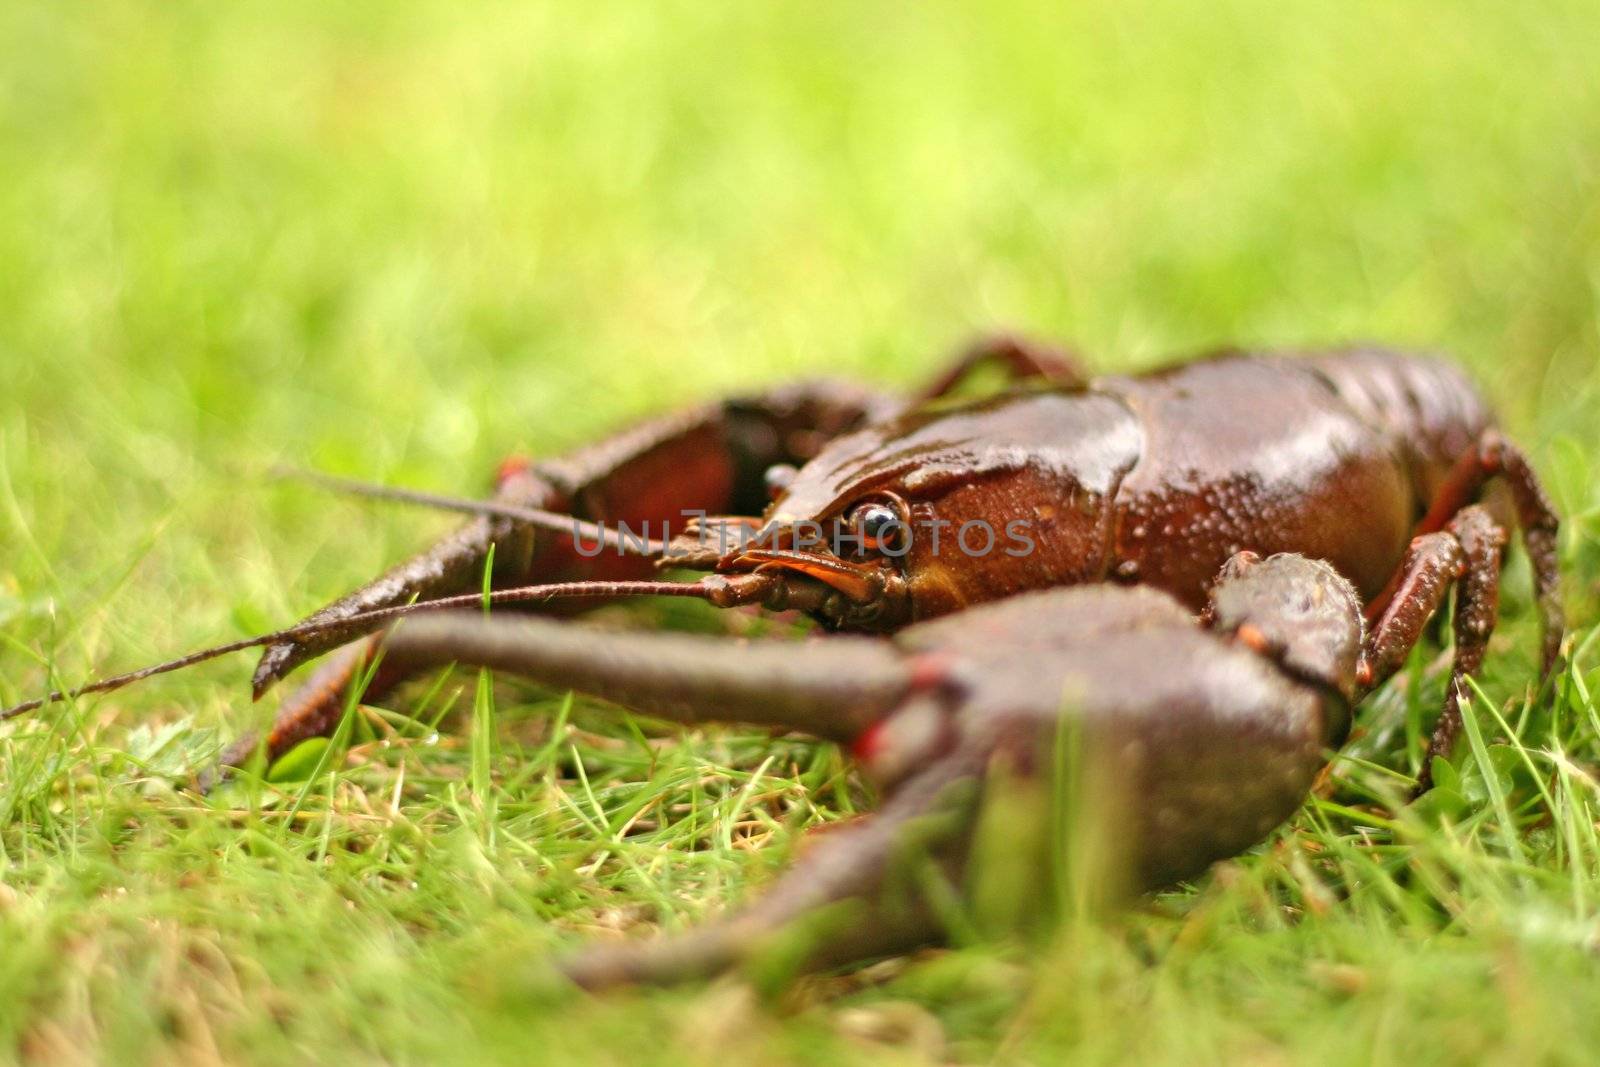 live crawfish in fresh green grass, selective focus on eye